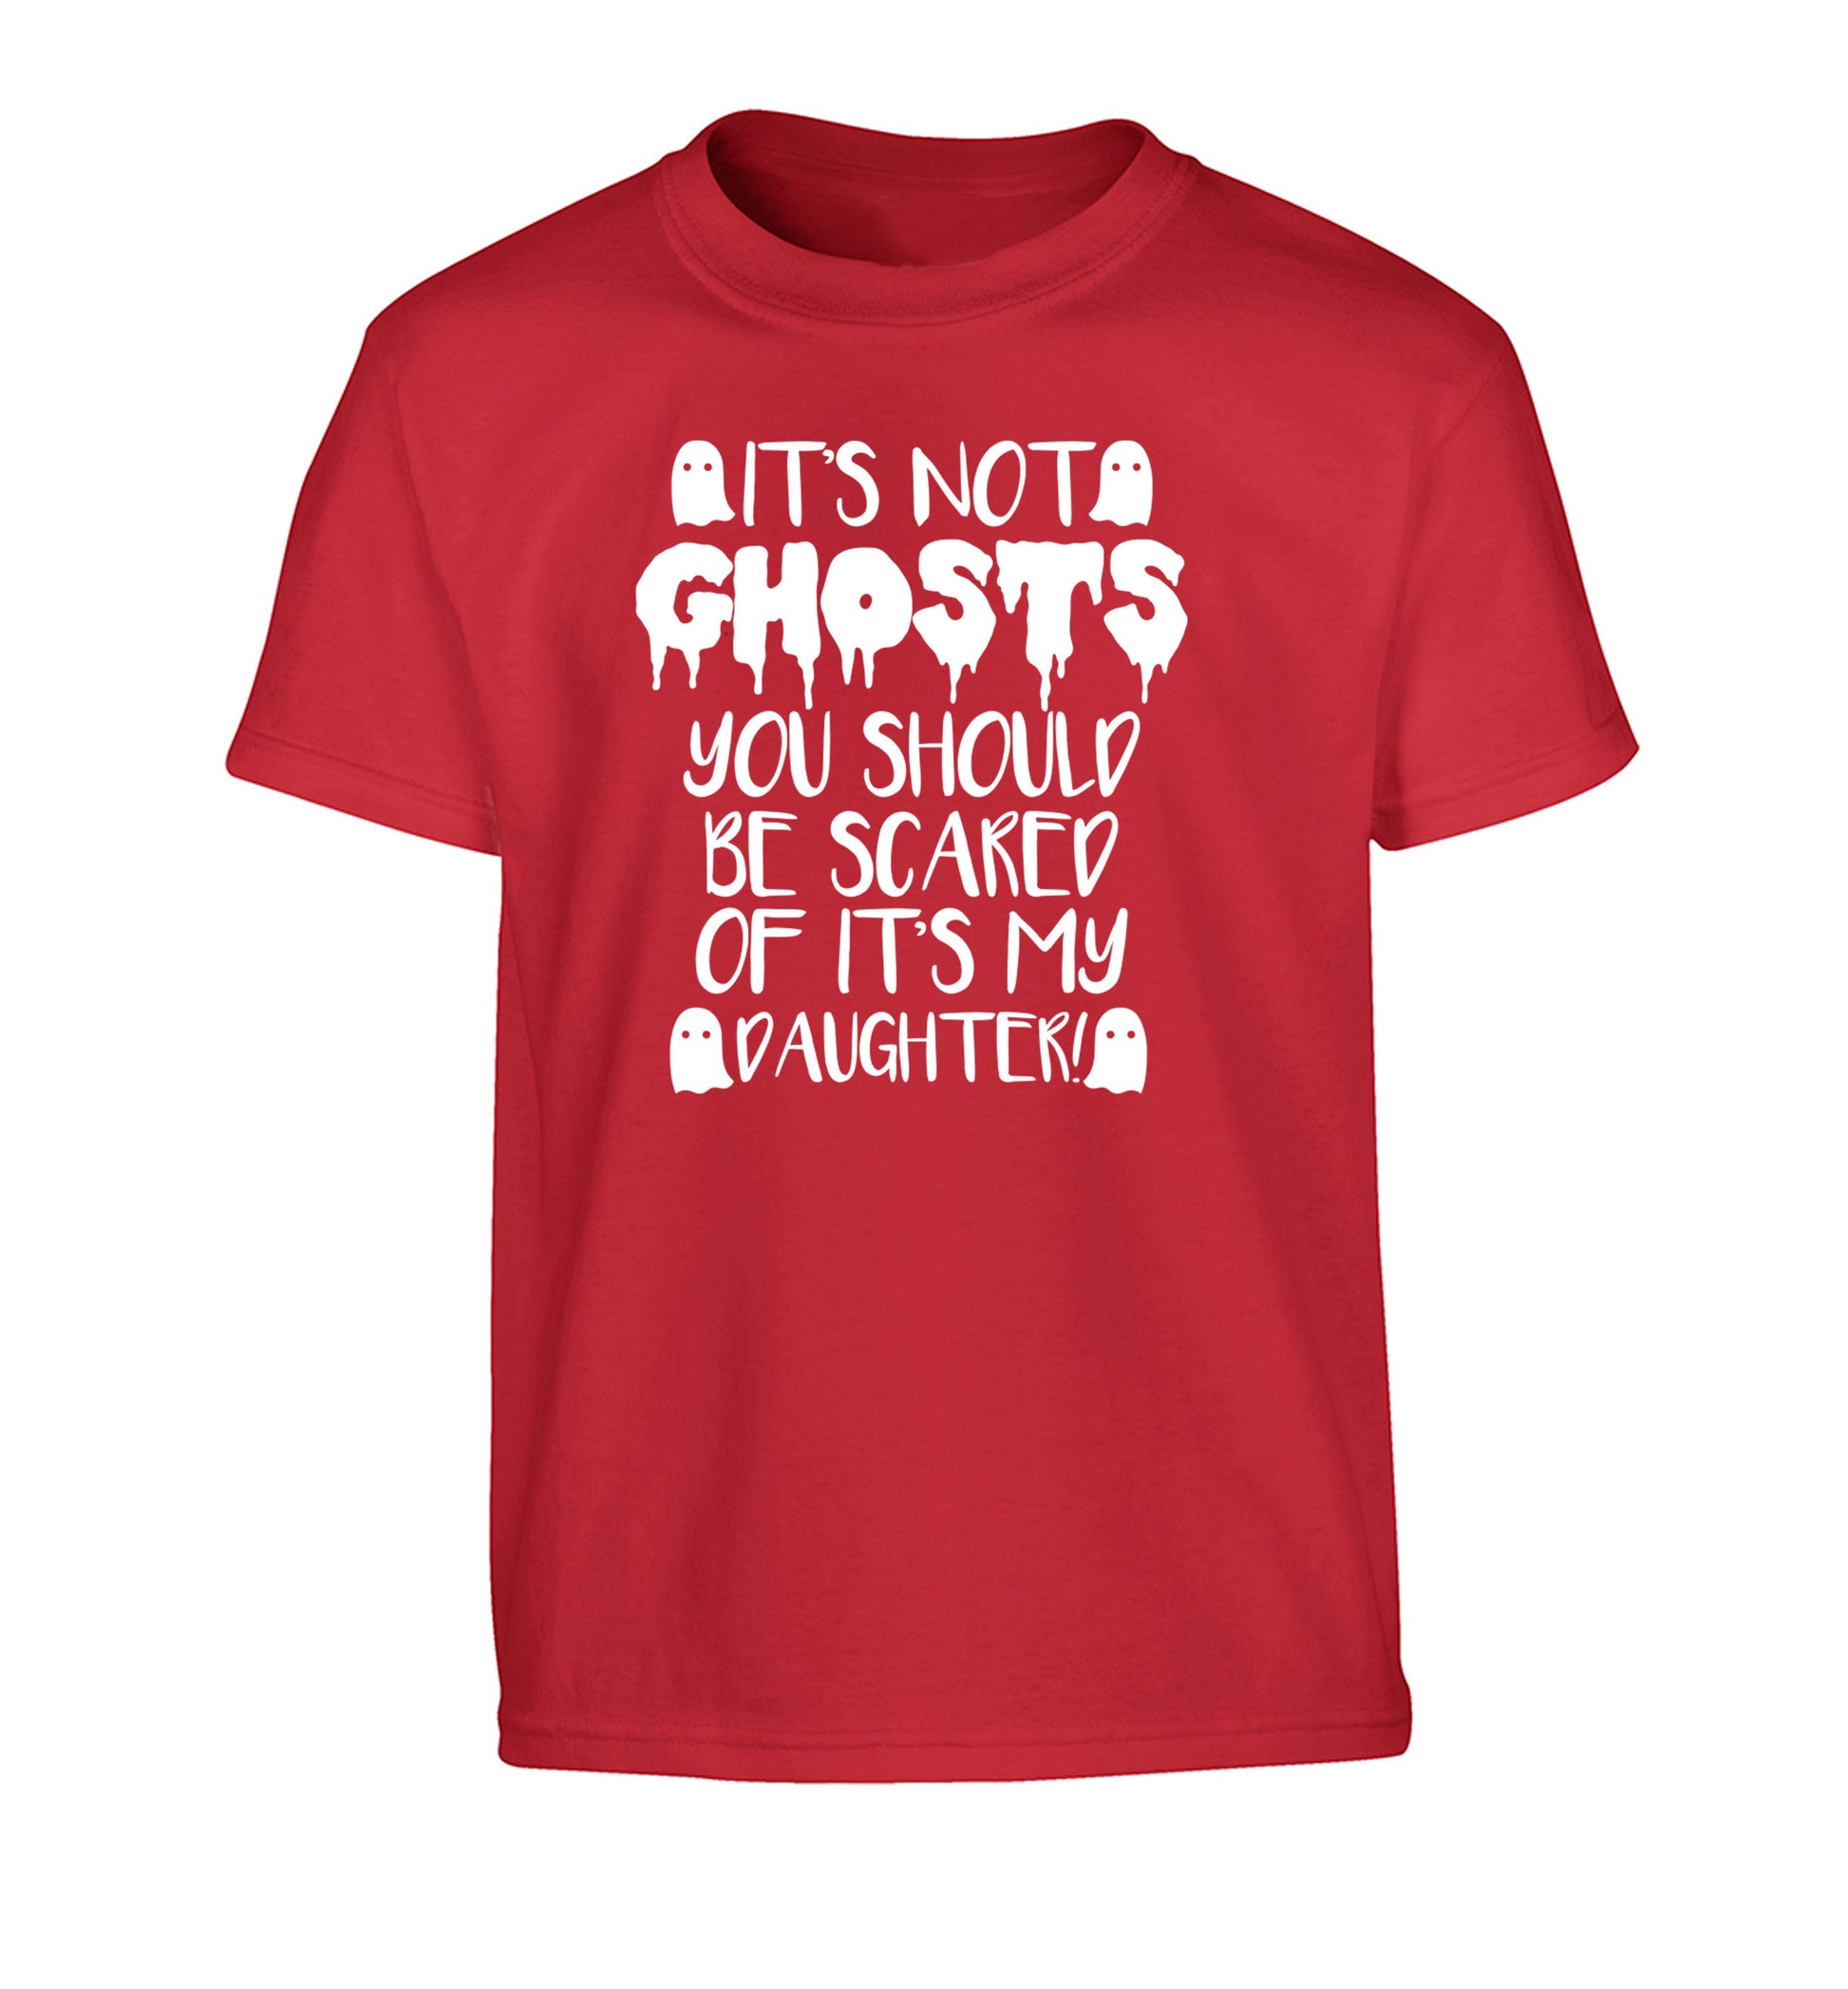 It's not ghosts you should be scared of it's my daughter! Children's red Tshirt 12-14 Years